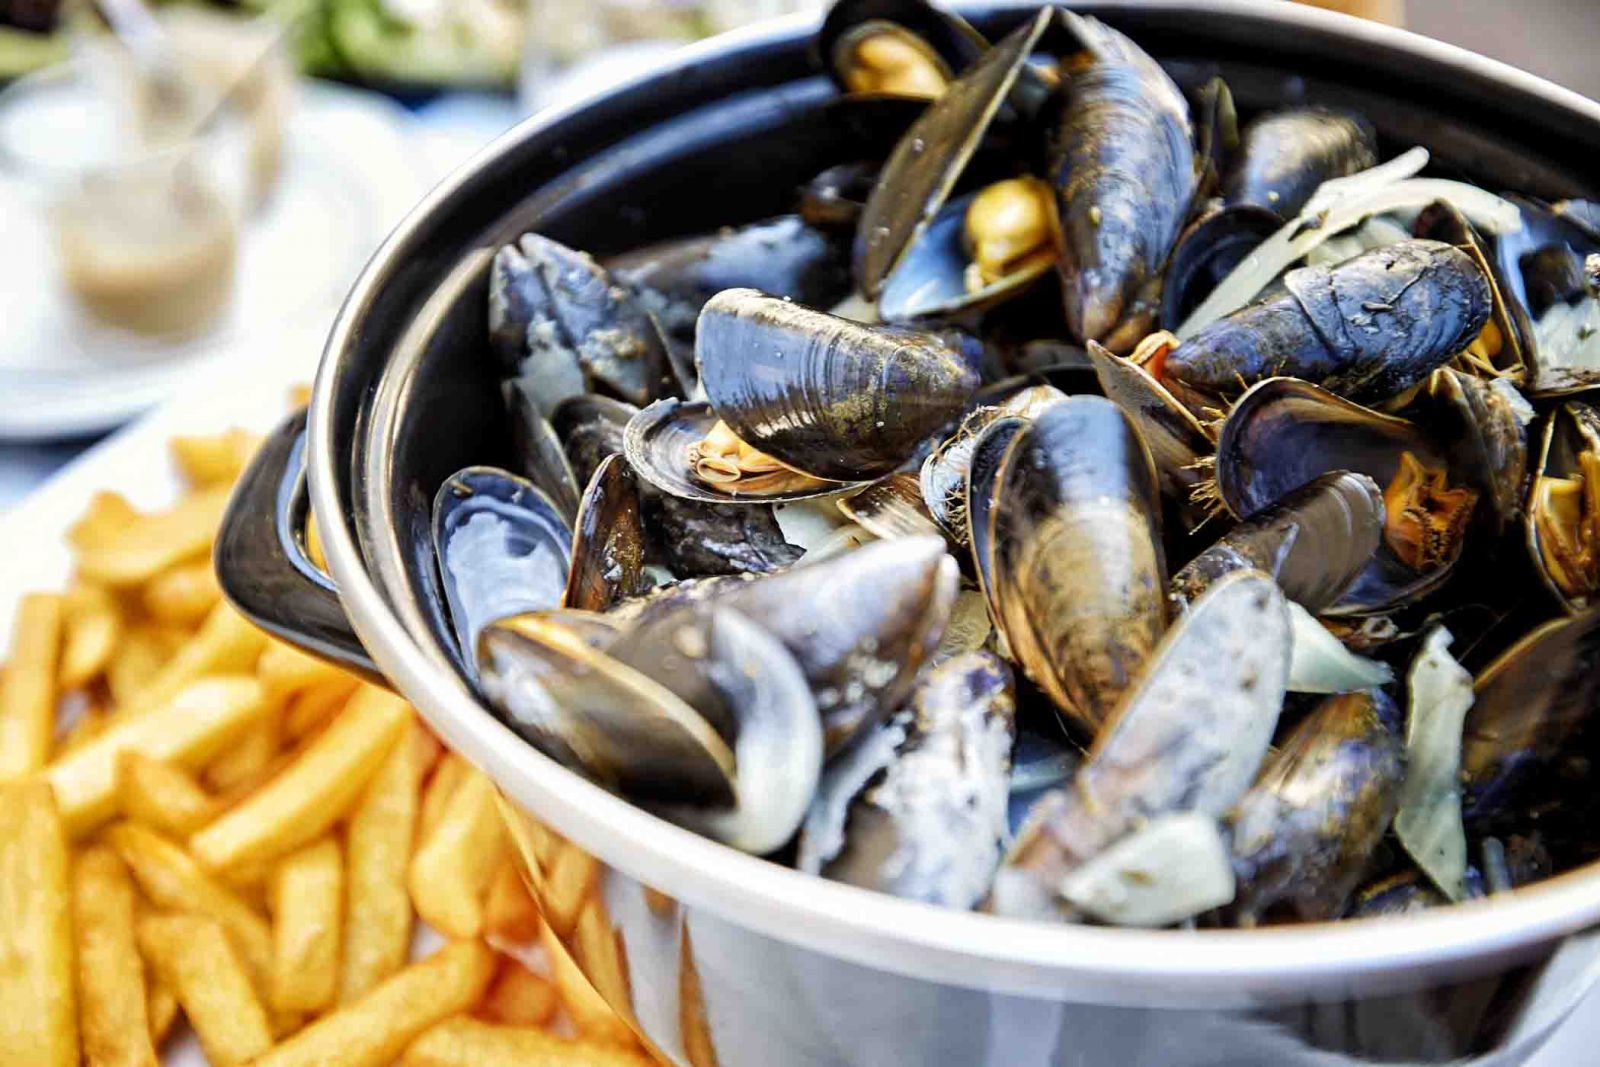 Fresh mussels and french fries at a seafood restaurant